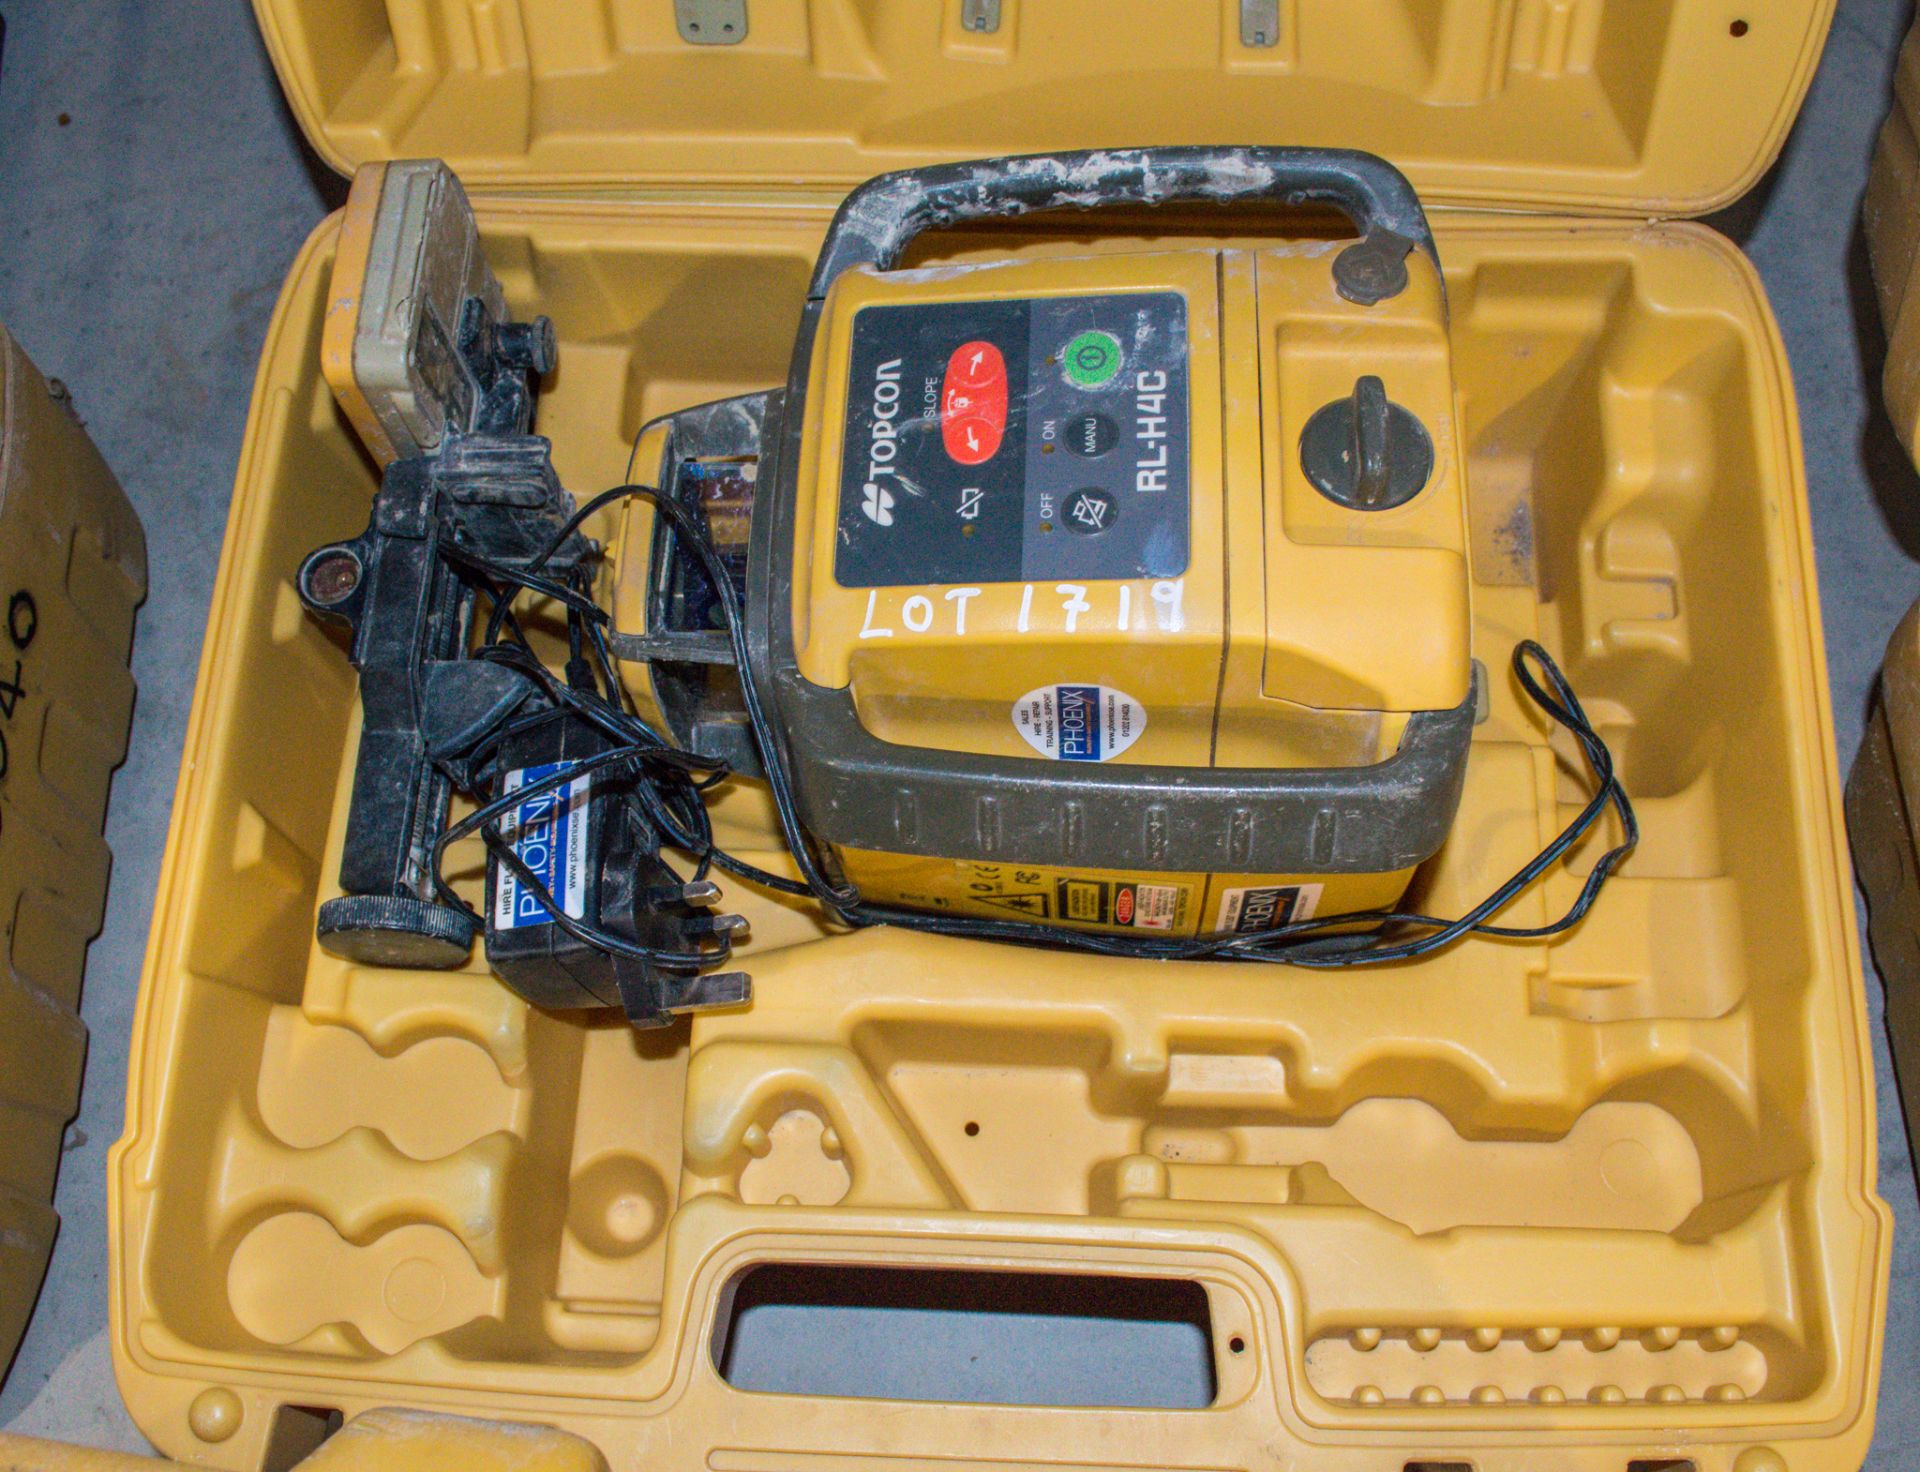 Topcon RL-H4C rotating laser level c/w LS-80L long range receiver, charger and carry case B0227002